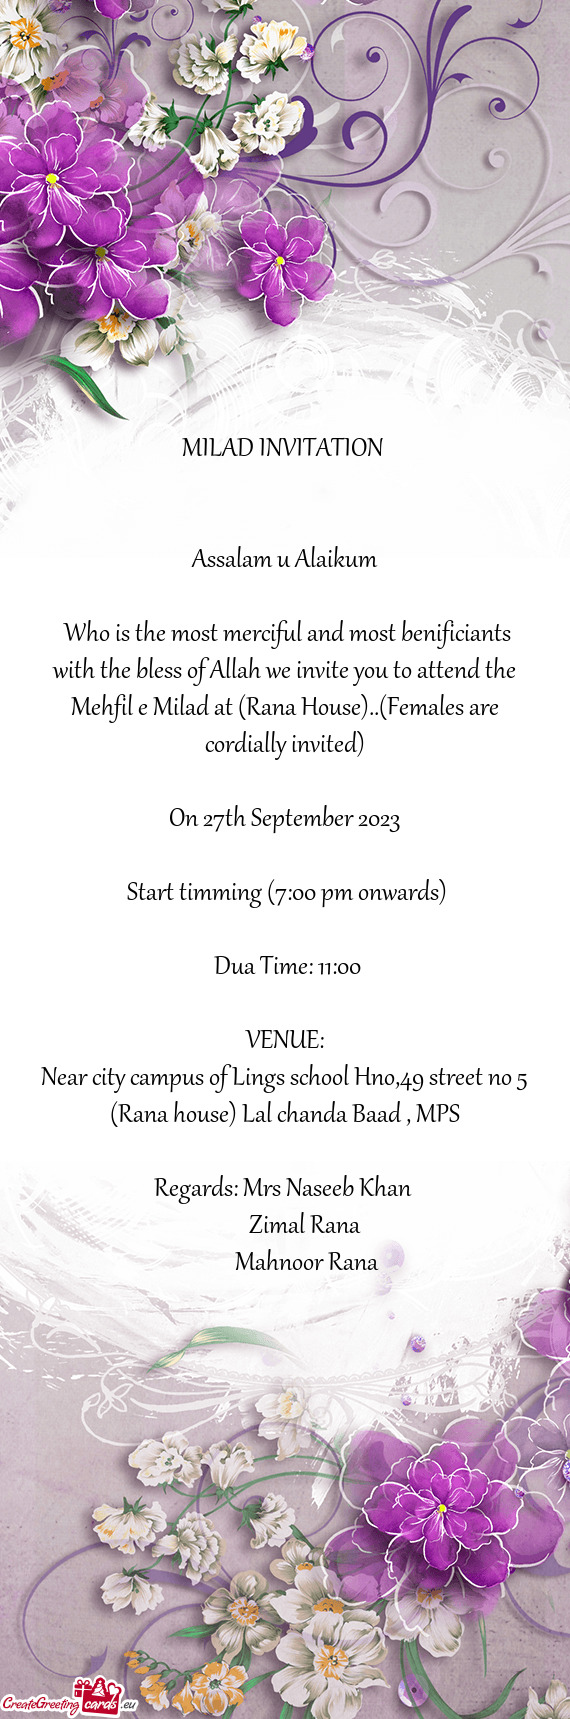 Who is the most merciful and most benificiants with the bless of Allah we invite you to attend the